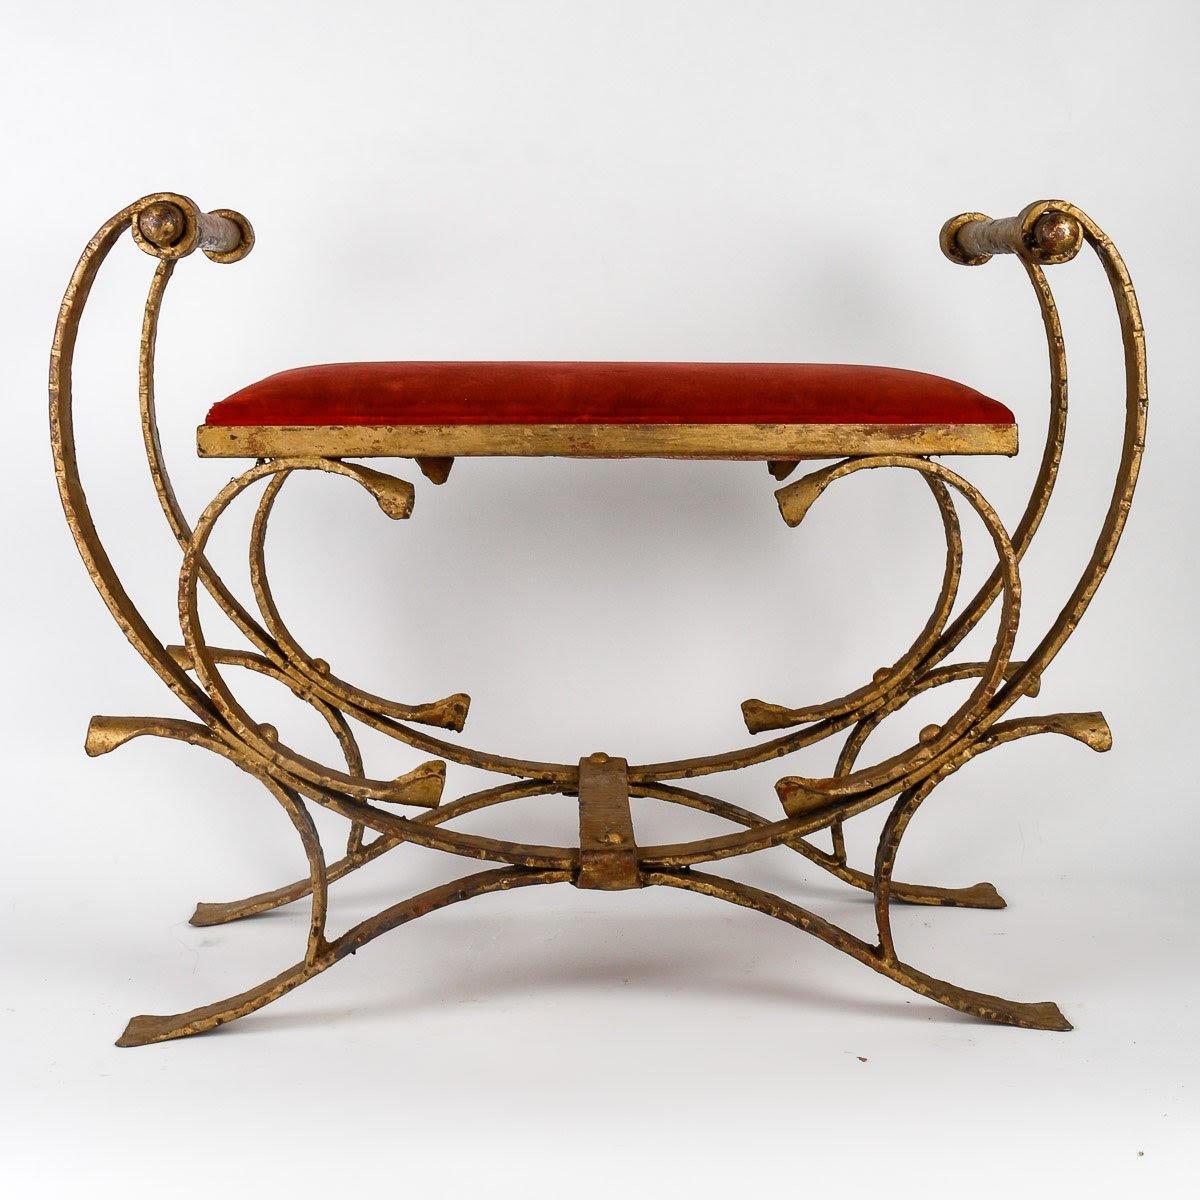 Pair of Gilded Wrought Iron Curule Stools and Seats, Early 20th Century.

Pair of 1930s-1940s wrought iron and gilt curule stools, red velvet seat, Art Deco style.  
W: 71cm, H: 54cm, D: 39cm